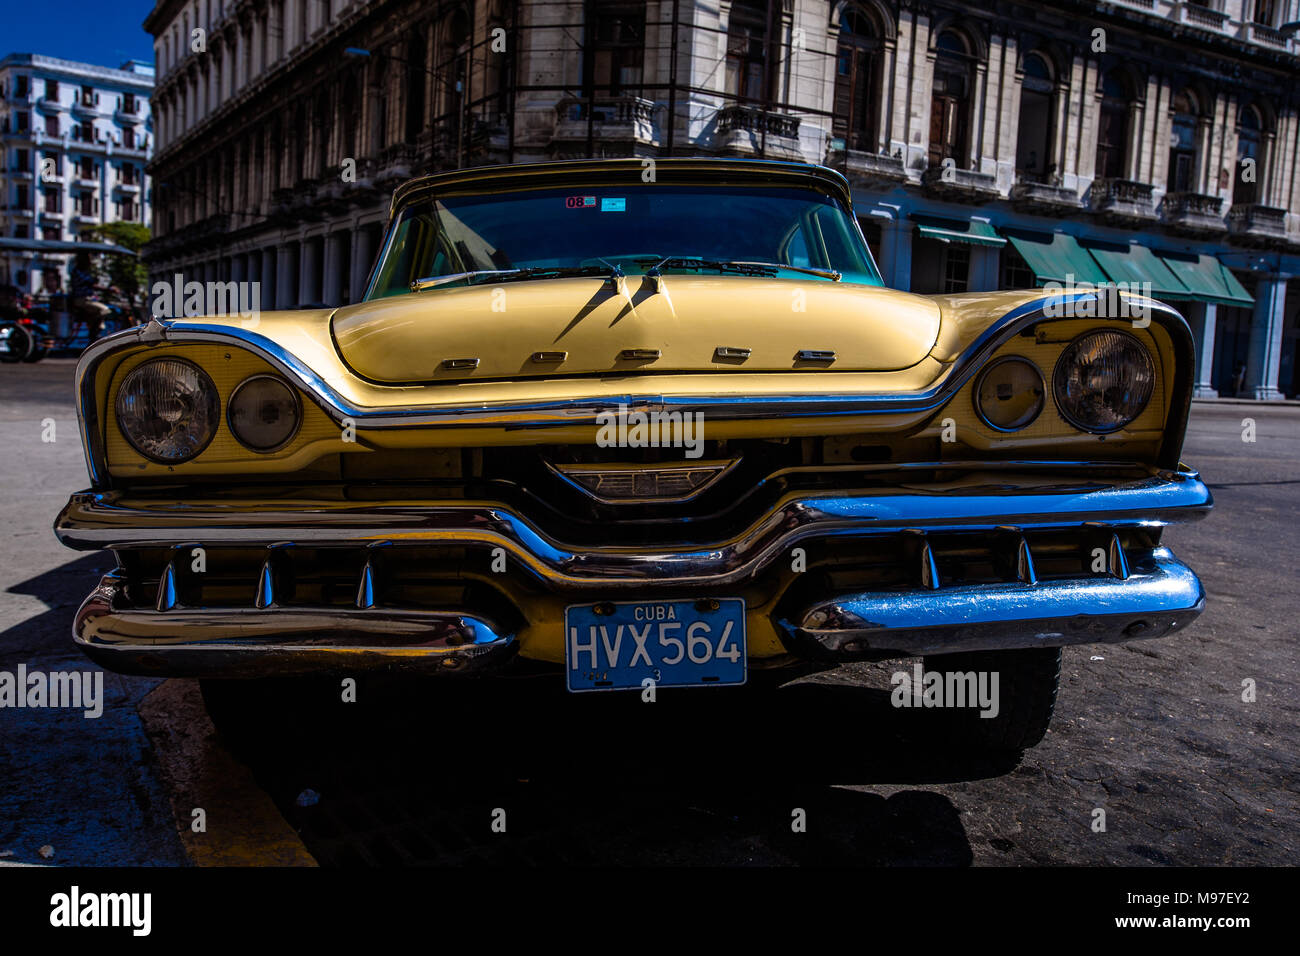 A 1958 classic Dodge Coronet waits for customer in a square in Havana, Cuba. Stock Photo